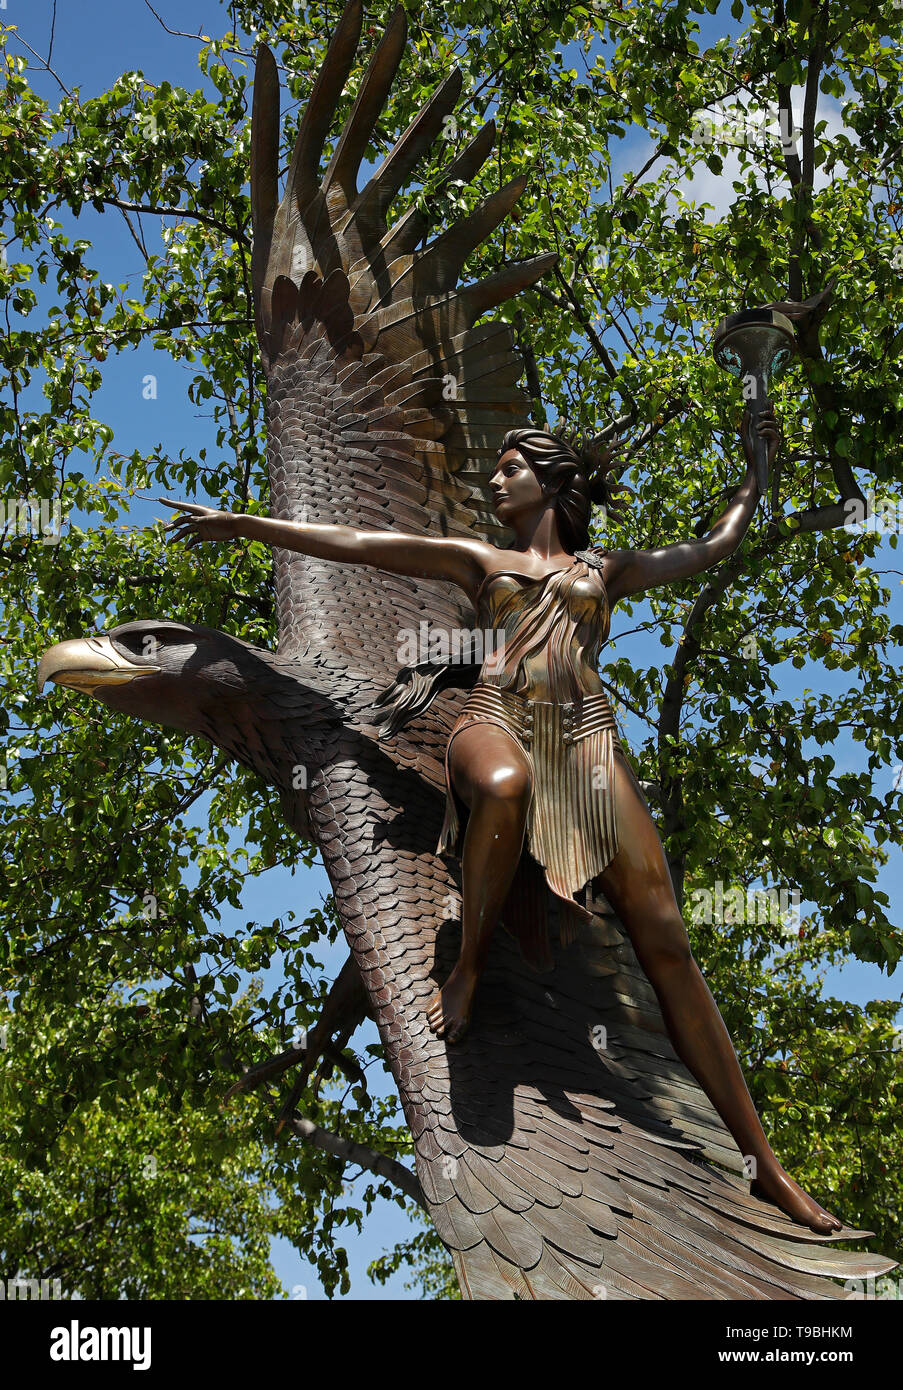 Cheemah, Mother of the Spirit-Fire, bronze monument dedicated to celebrating cultural diversity, world unity and care for the earth, in Oakland, Ca. Stock Photo